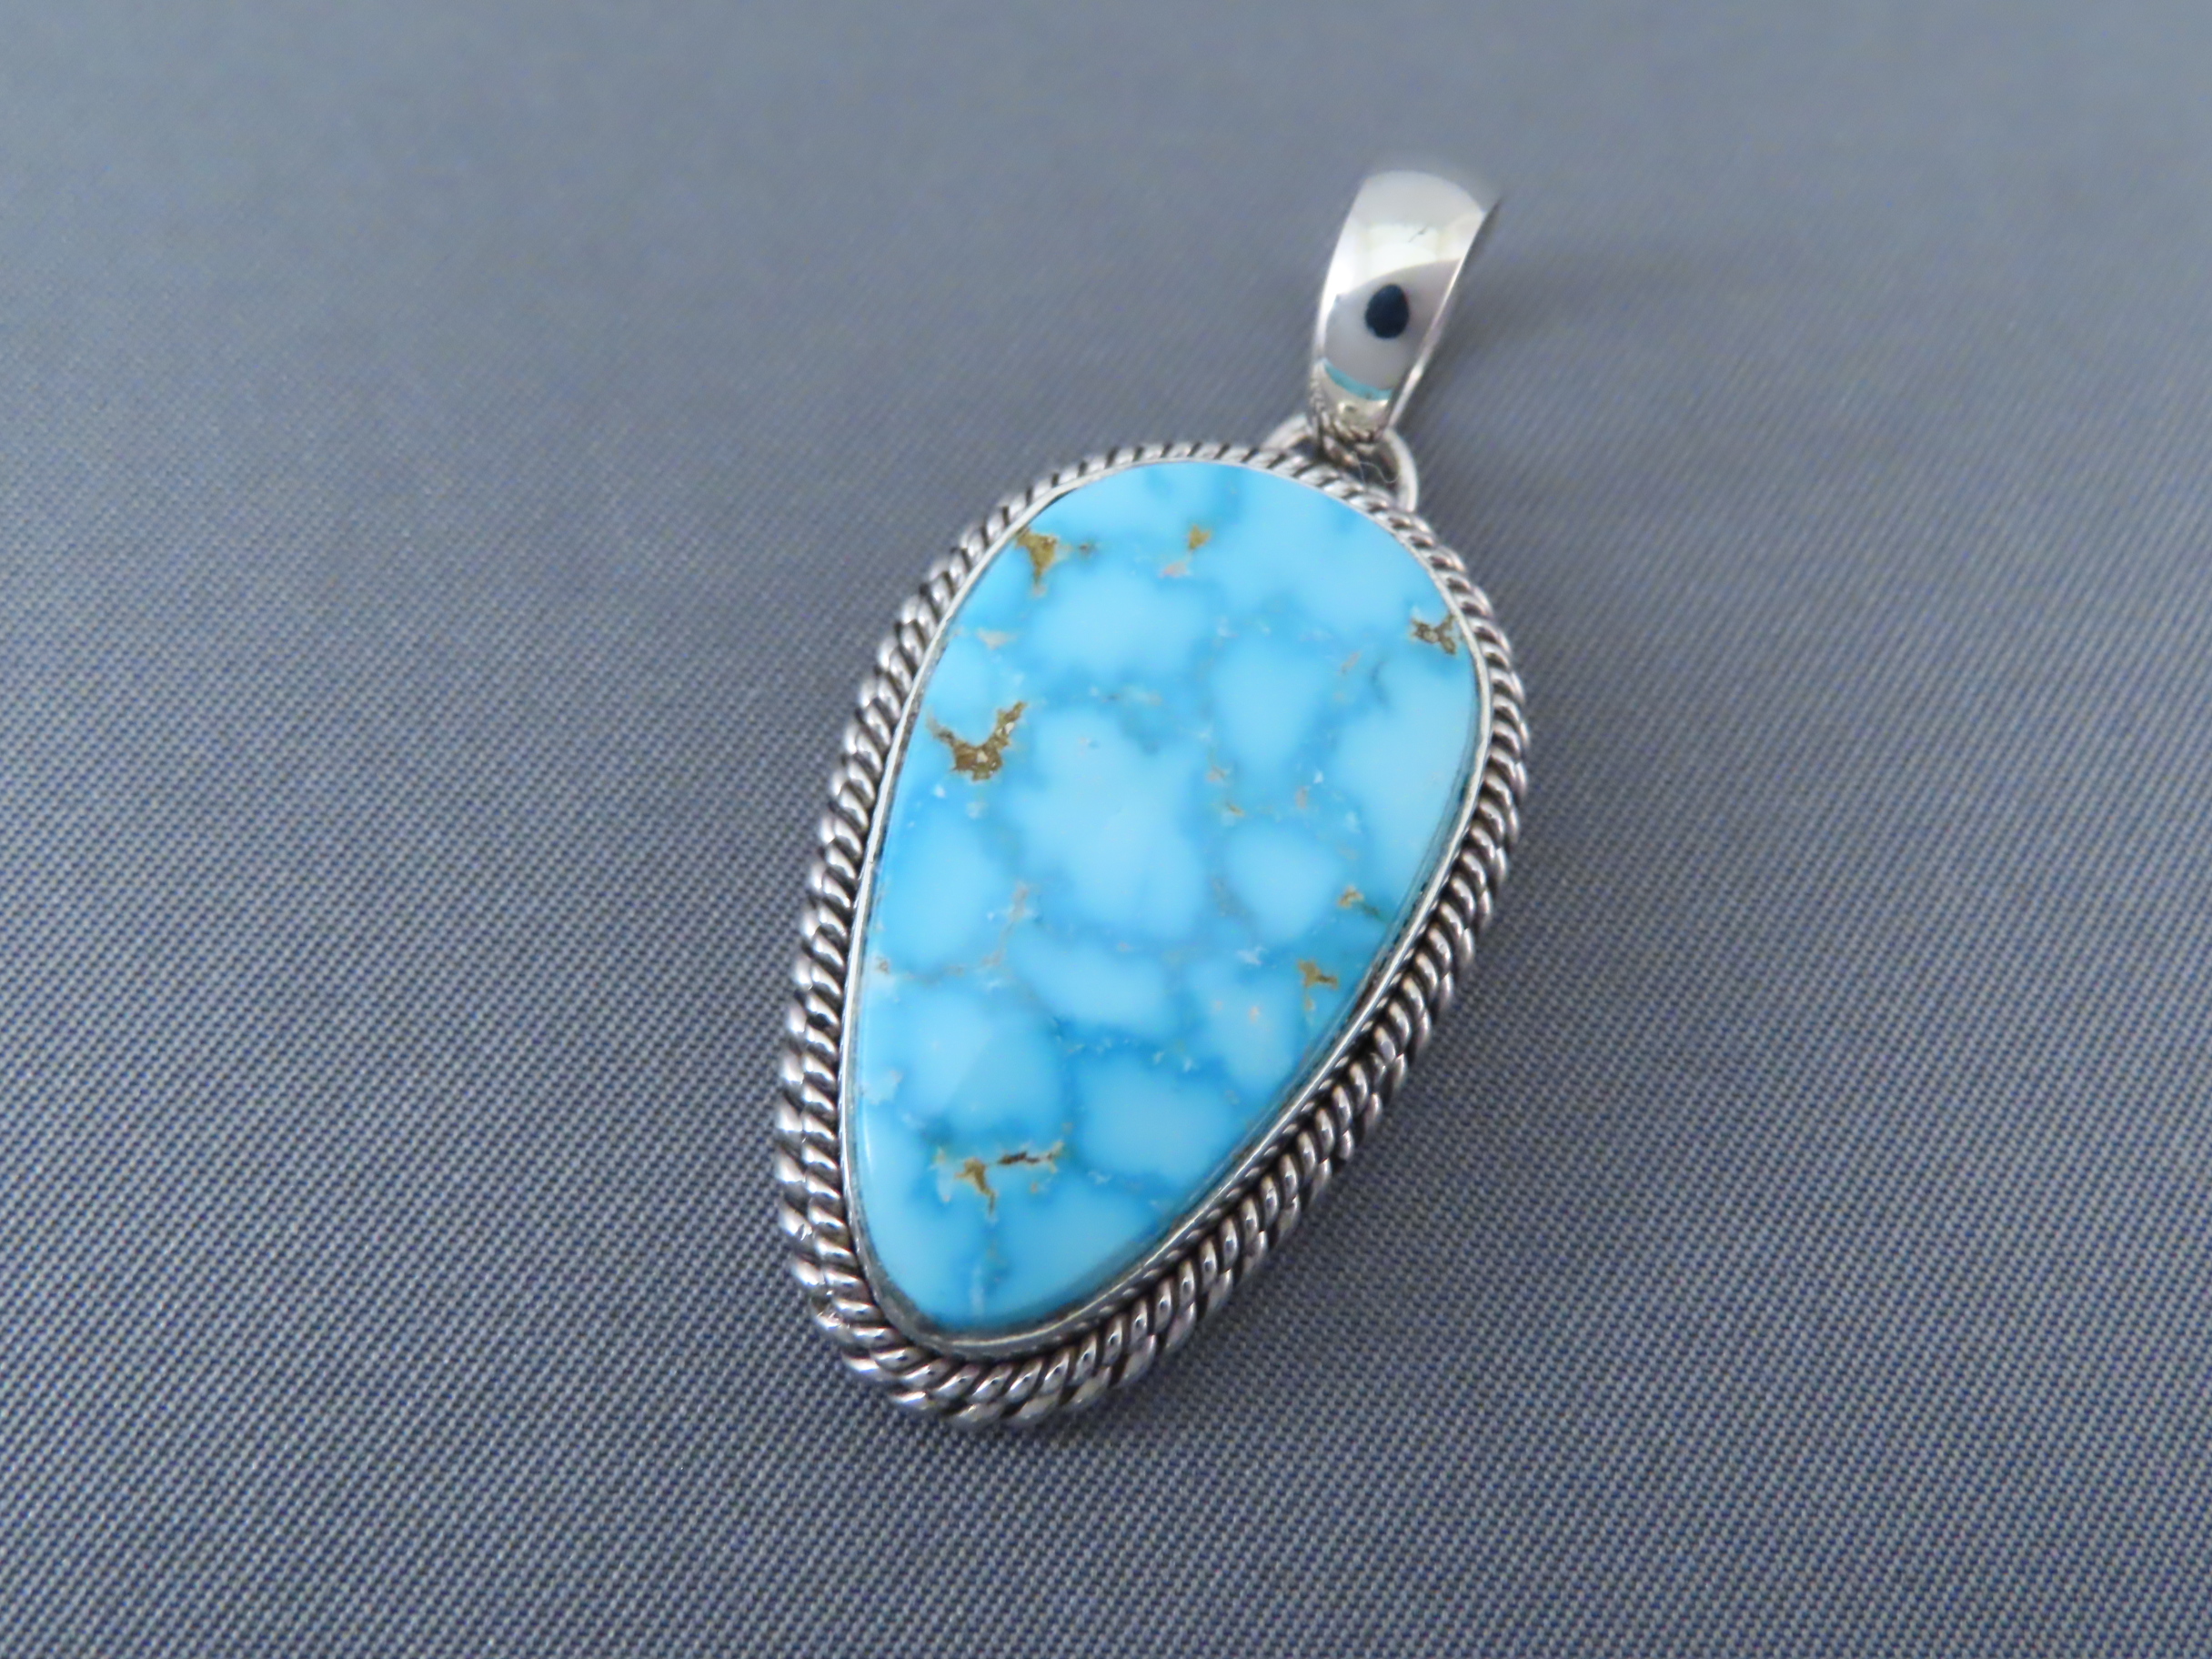 Buy Turquoise Jewelry - Smaller Blue Kingman Turquoise Slider Pendant by Navajo jeweler, Artie Yellowhorse FOR SALE $325-